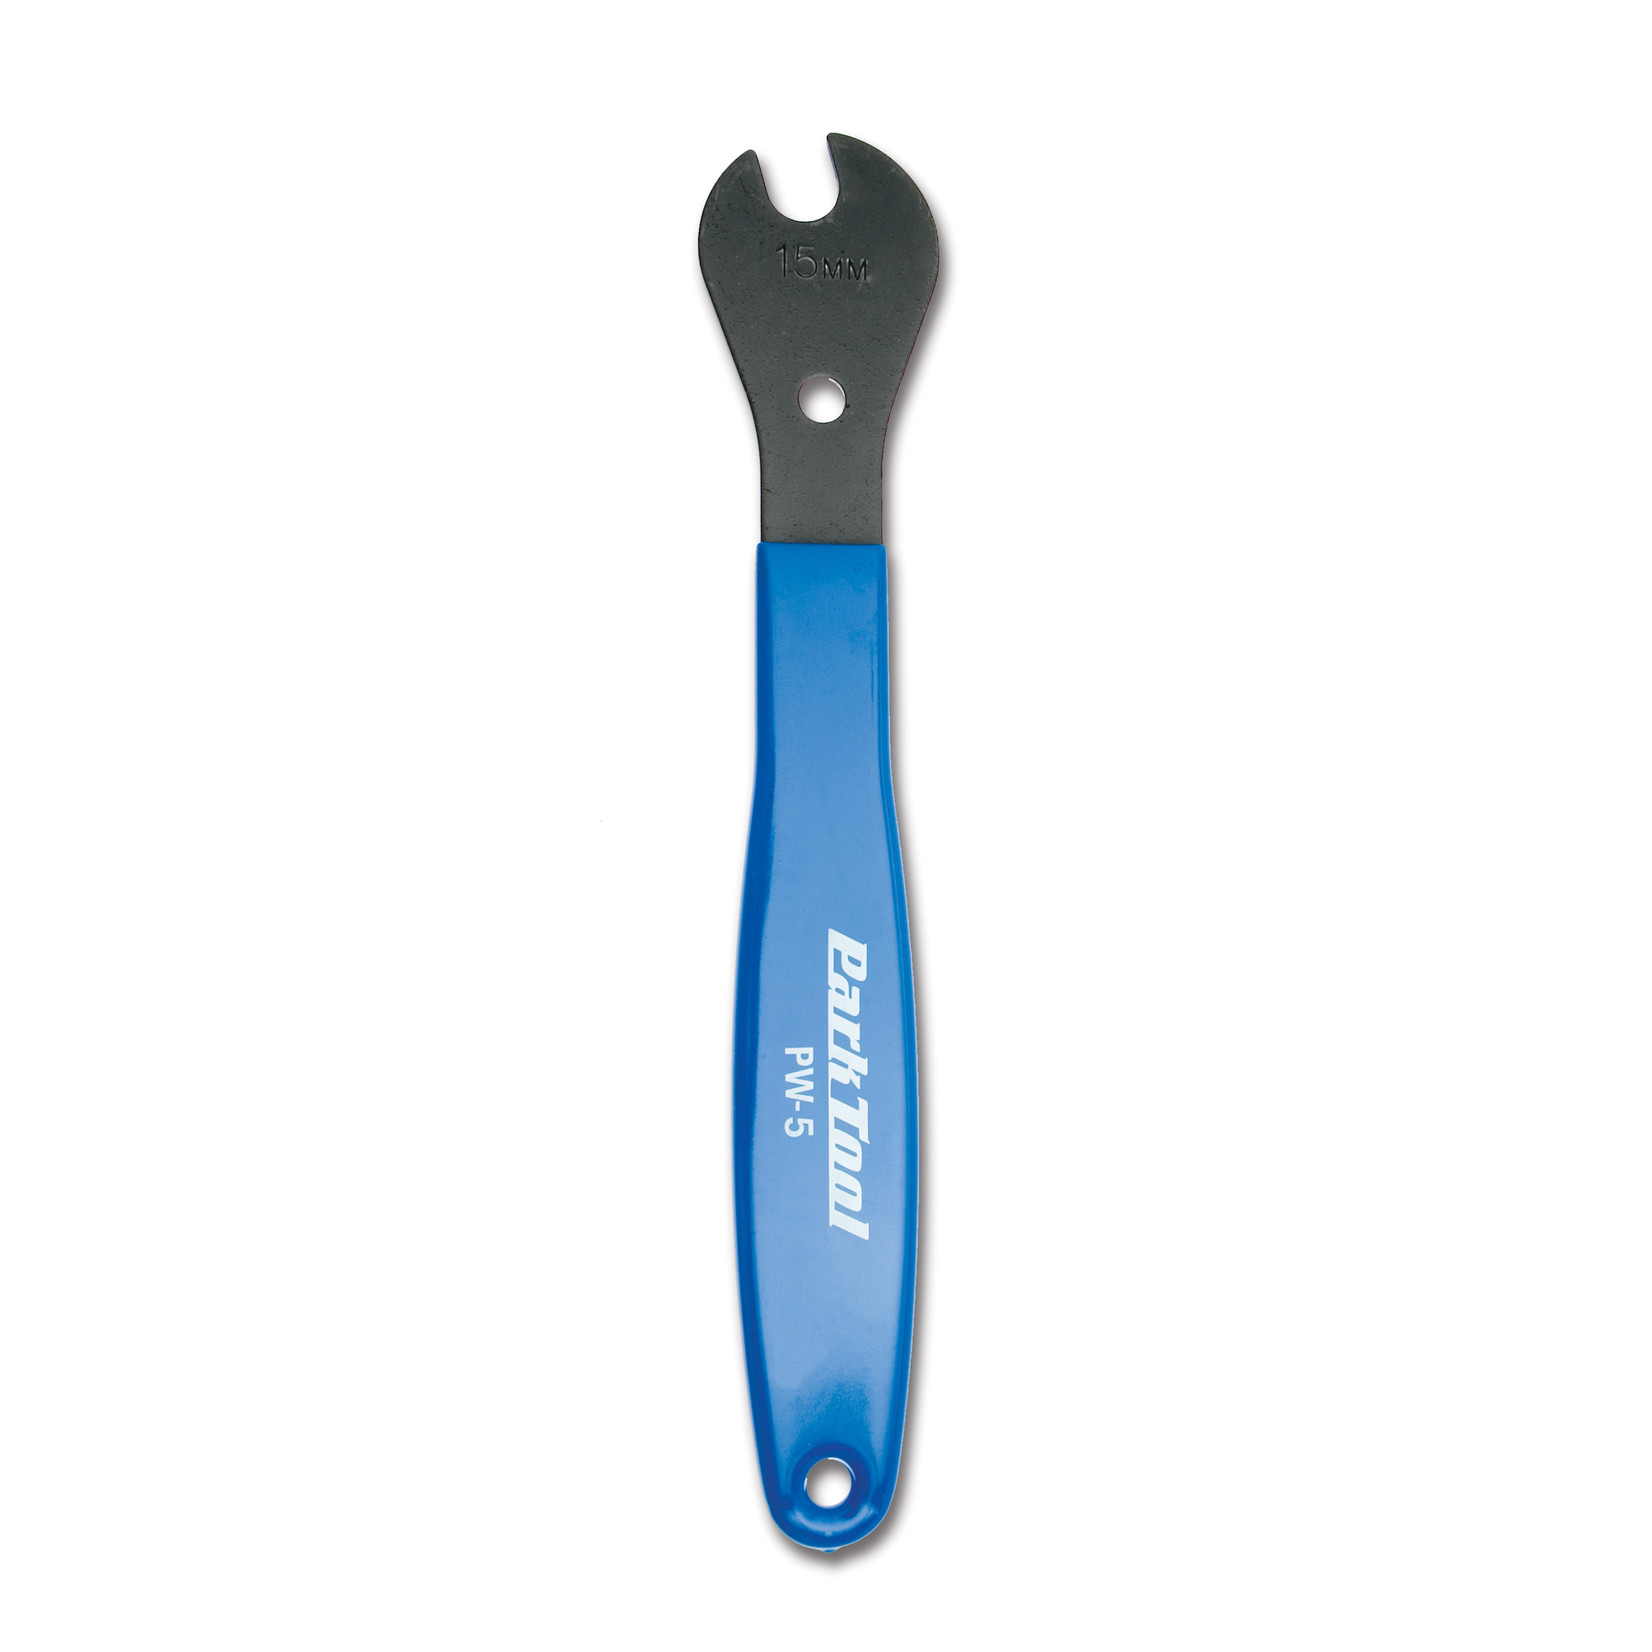 Park Tool PW-5 Pedal Wrench